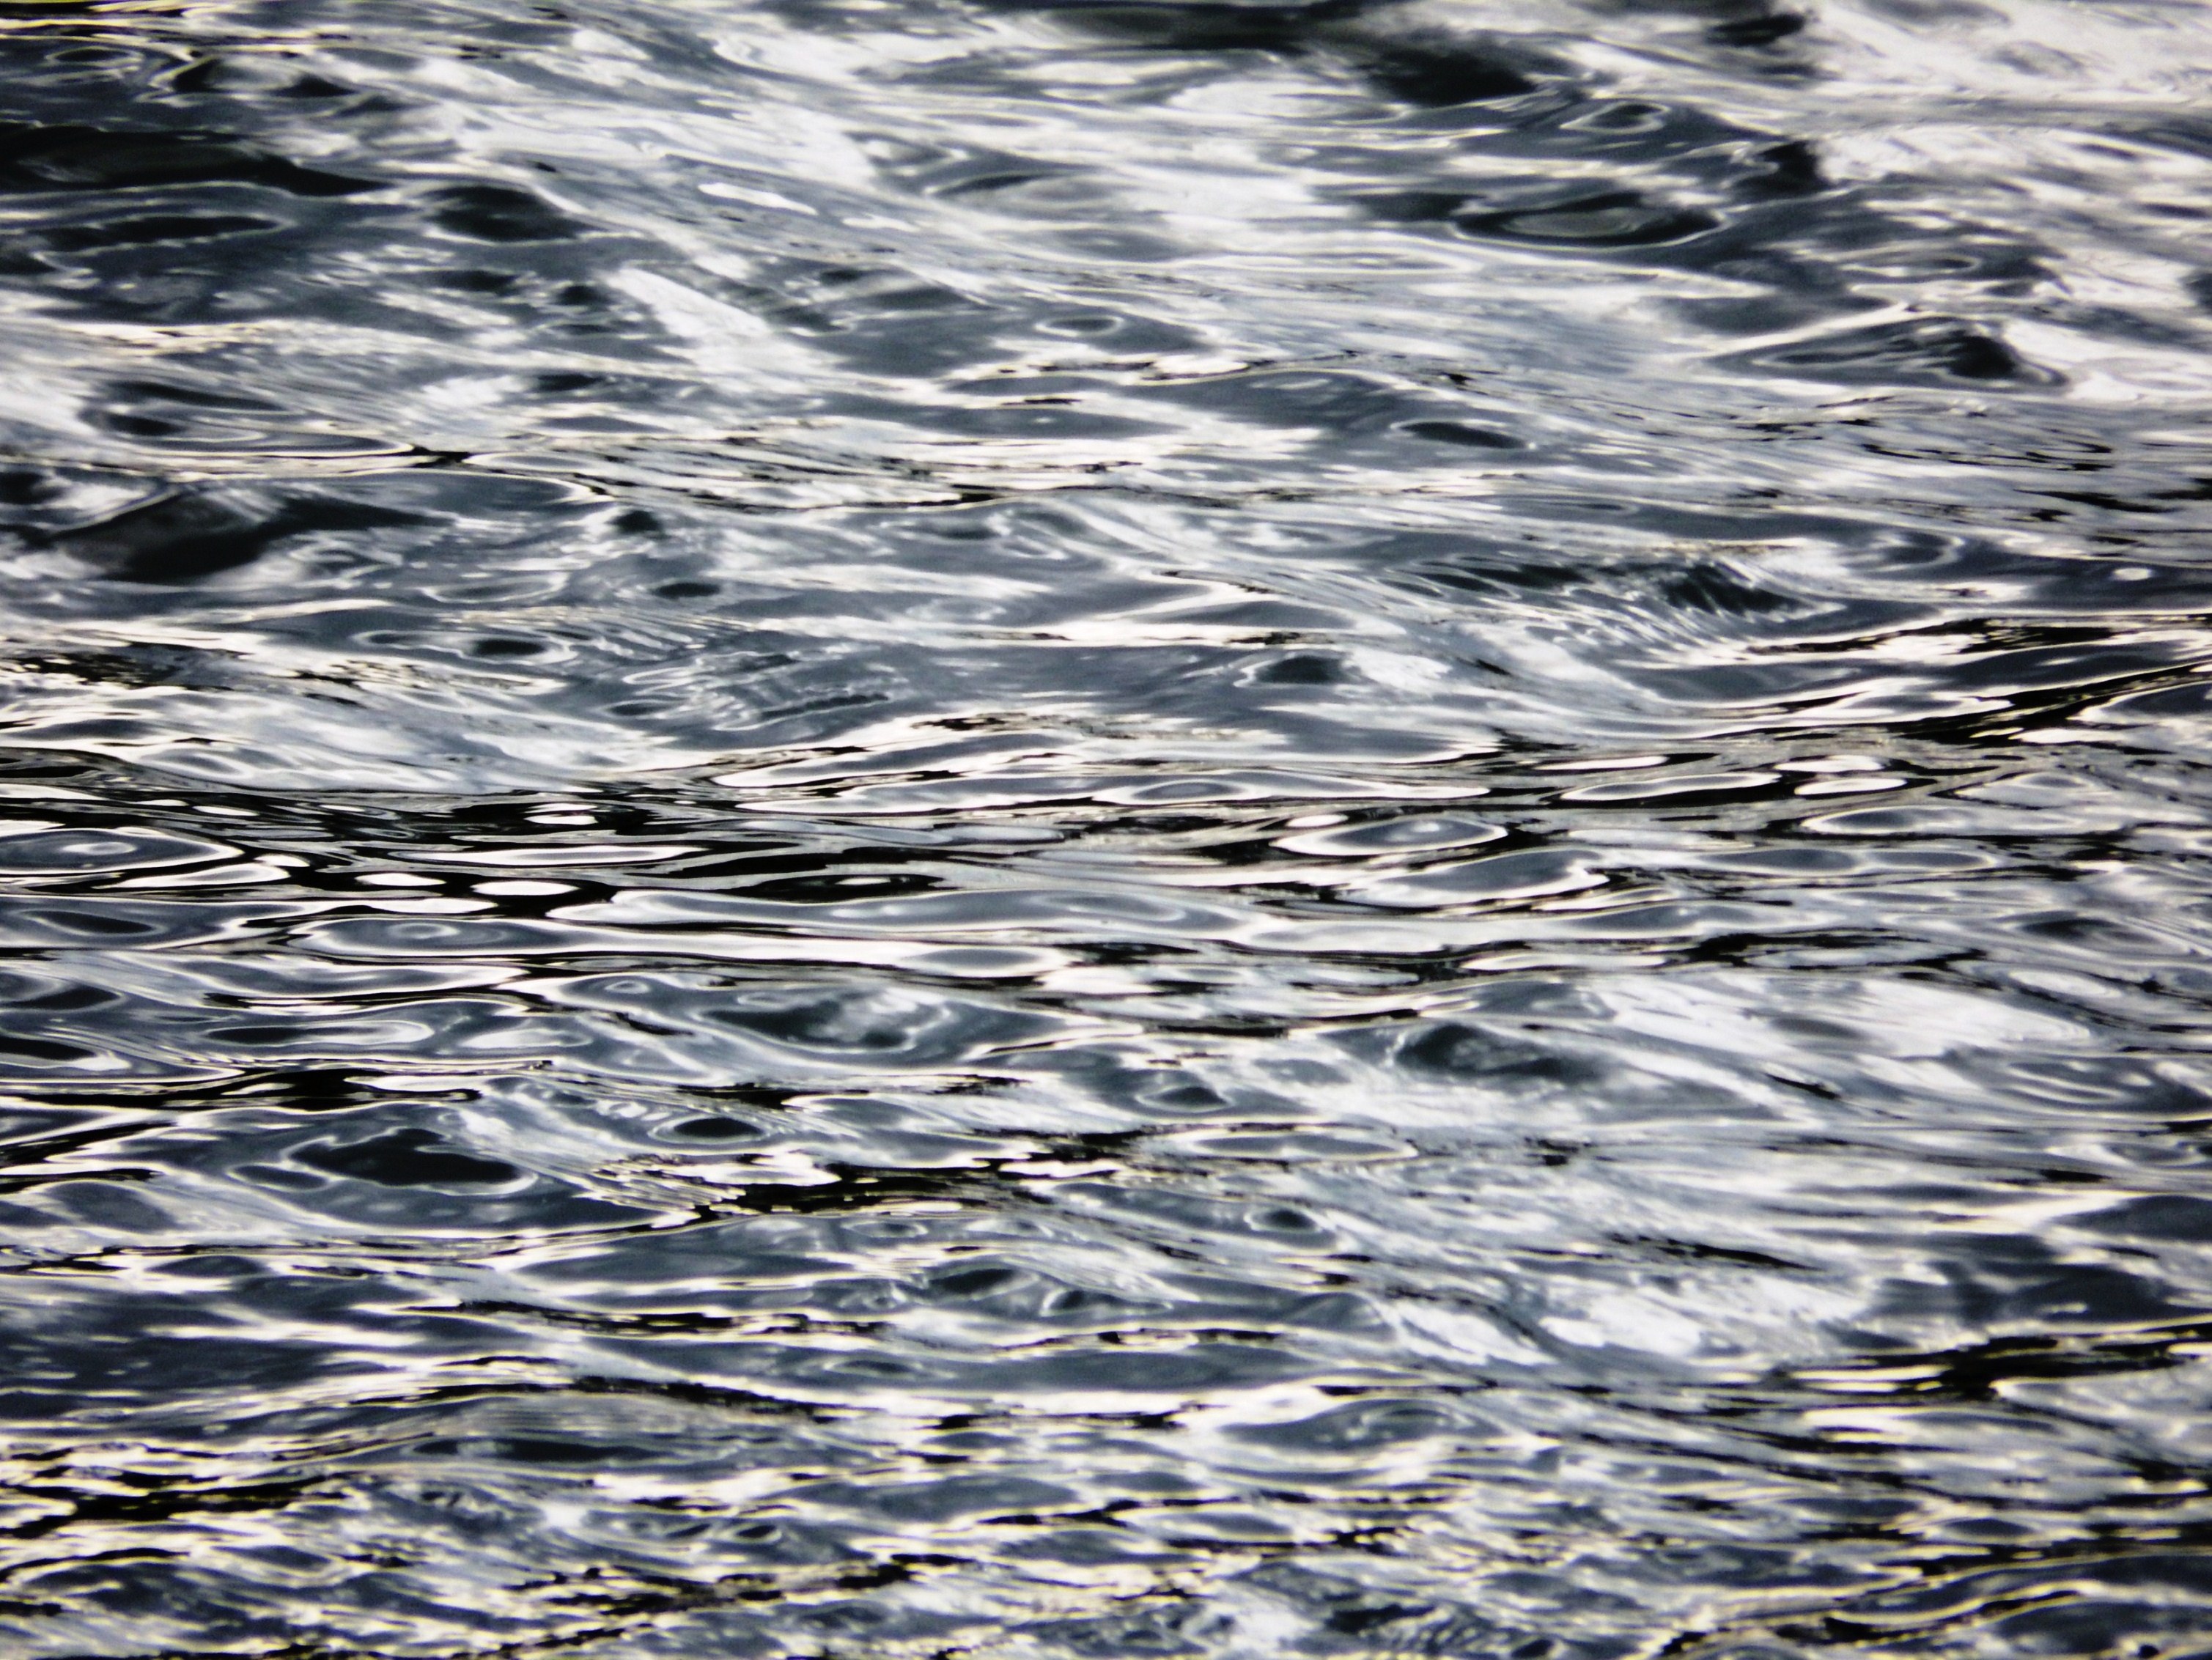 Ocean ripples and waves texture photo